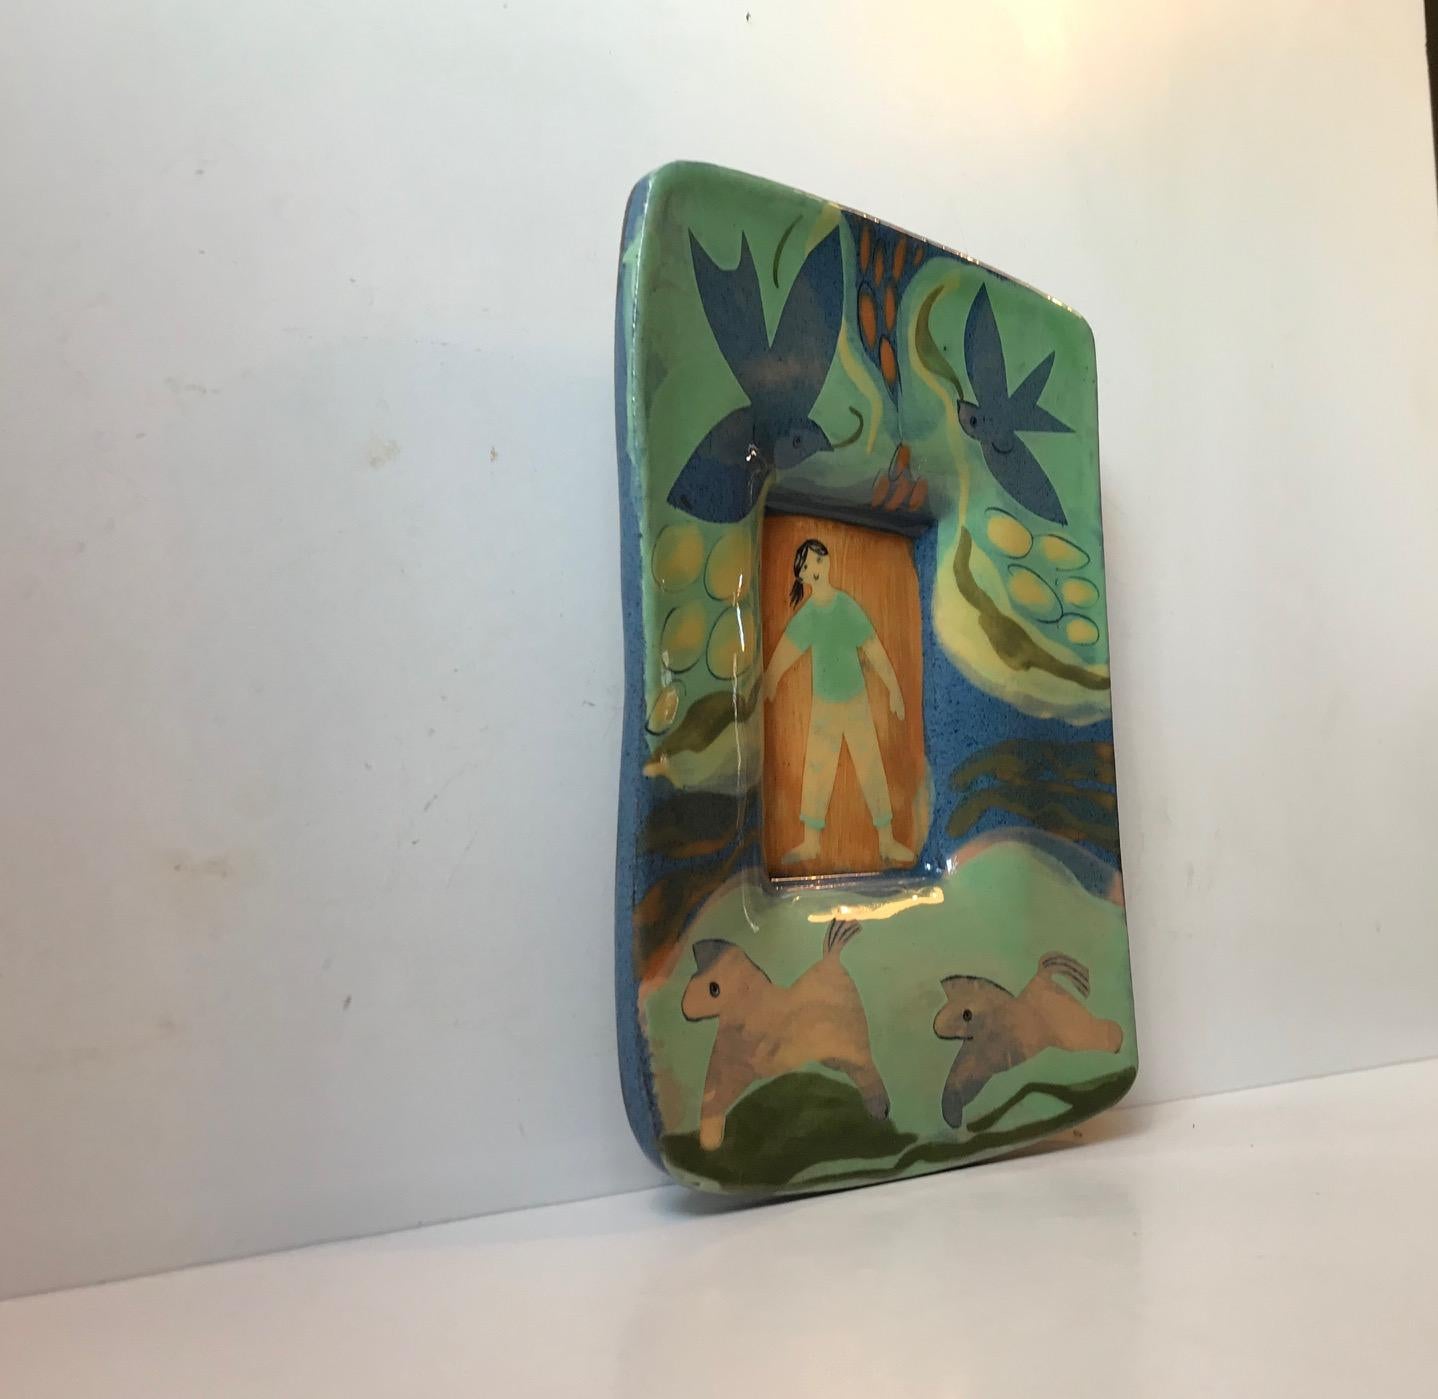 Vibrant and glossy in color palet this pottery wall plaque depicts a girl or woman lying in bed surrounded by naive dreamscape. It is executed in Scandinavia during the 1960s or 1970s by an anonymous artist or ceramist. It has an unidentified